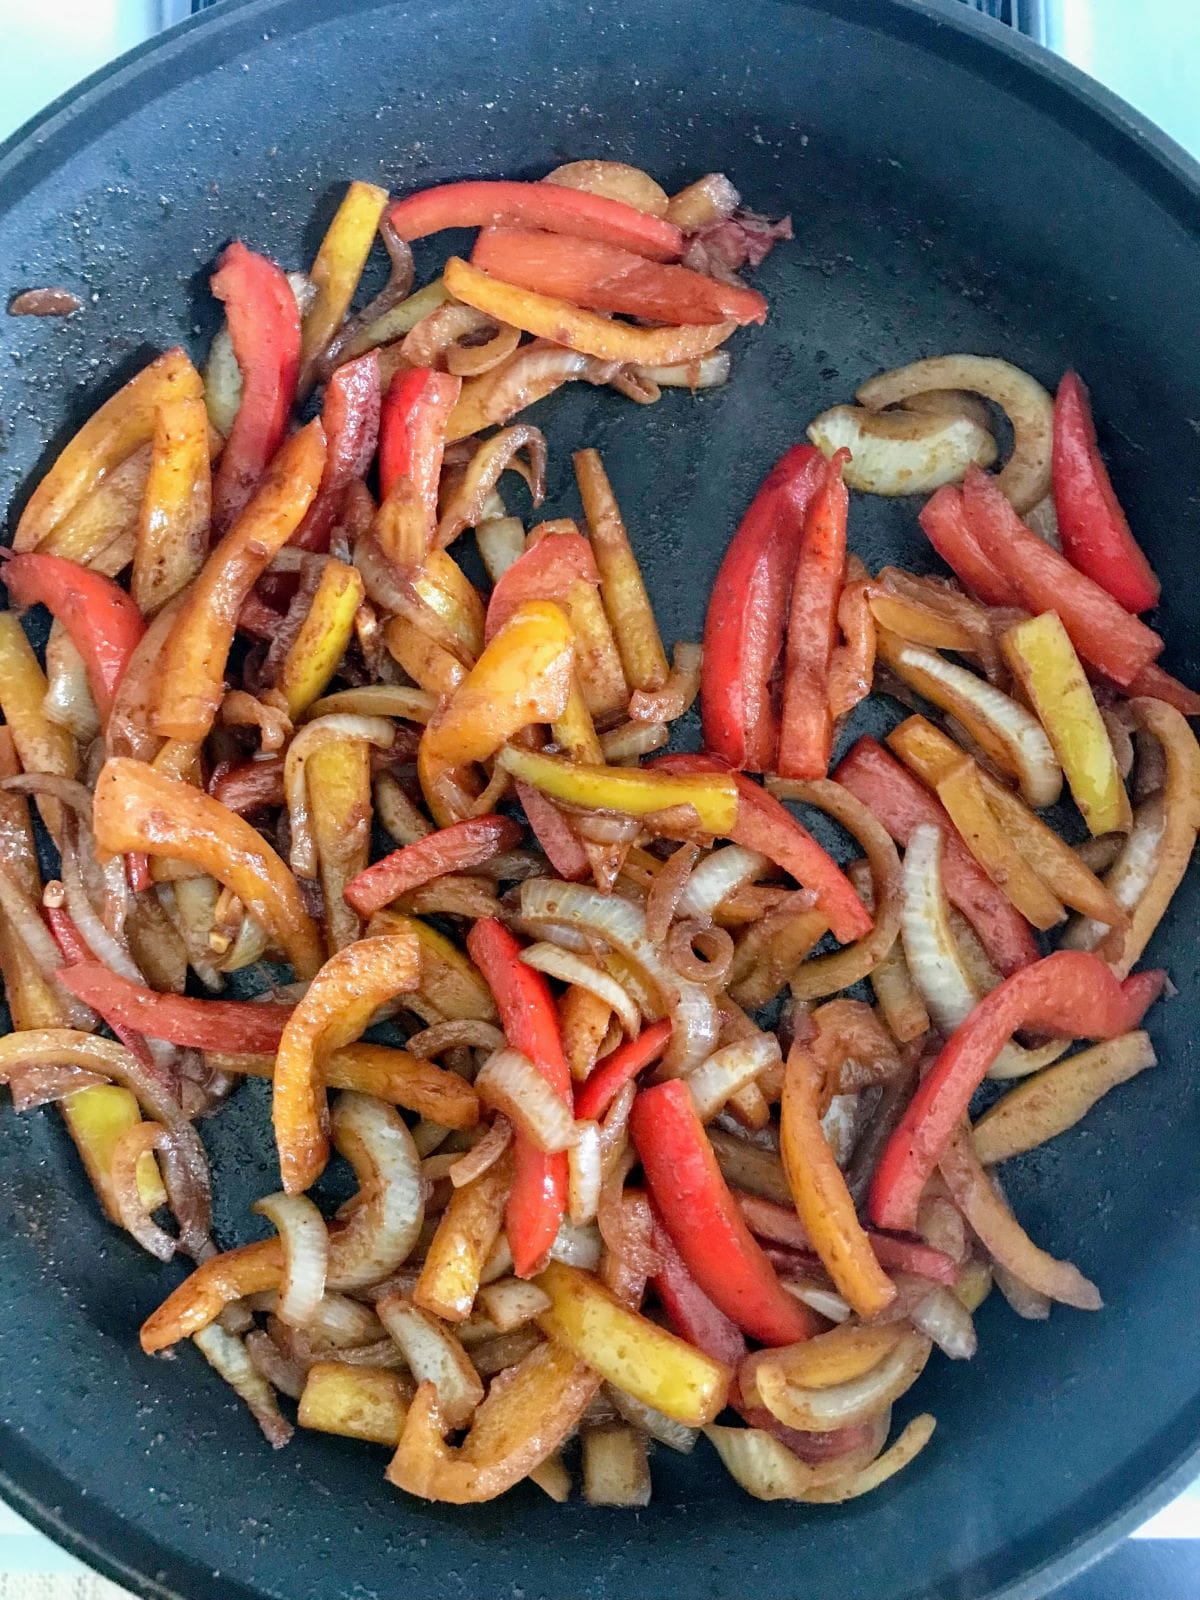 sliced onions, bell peppers cooking in a skillet